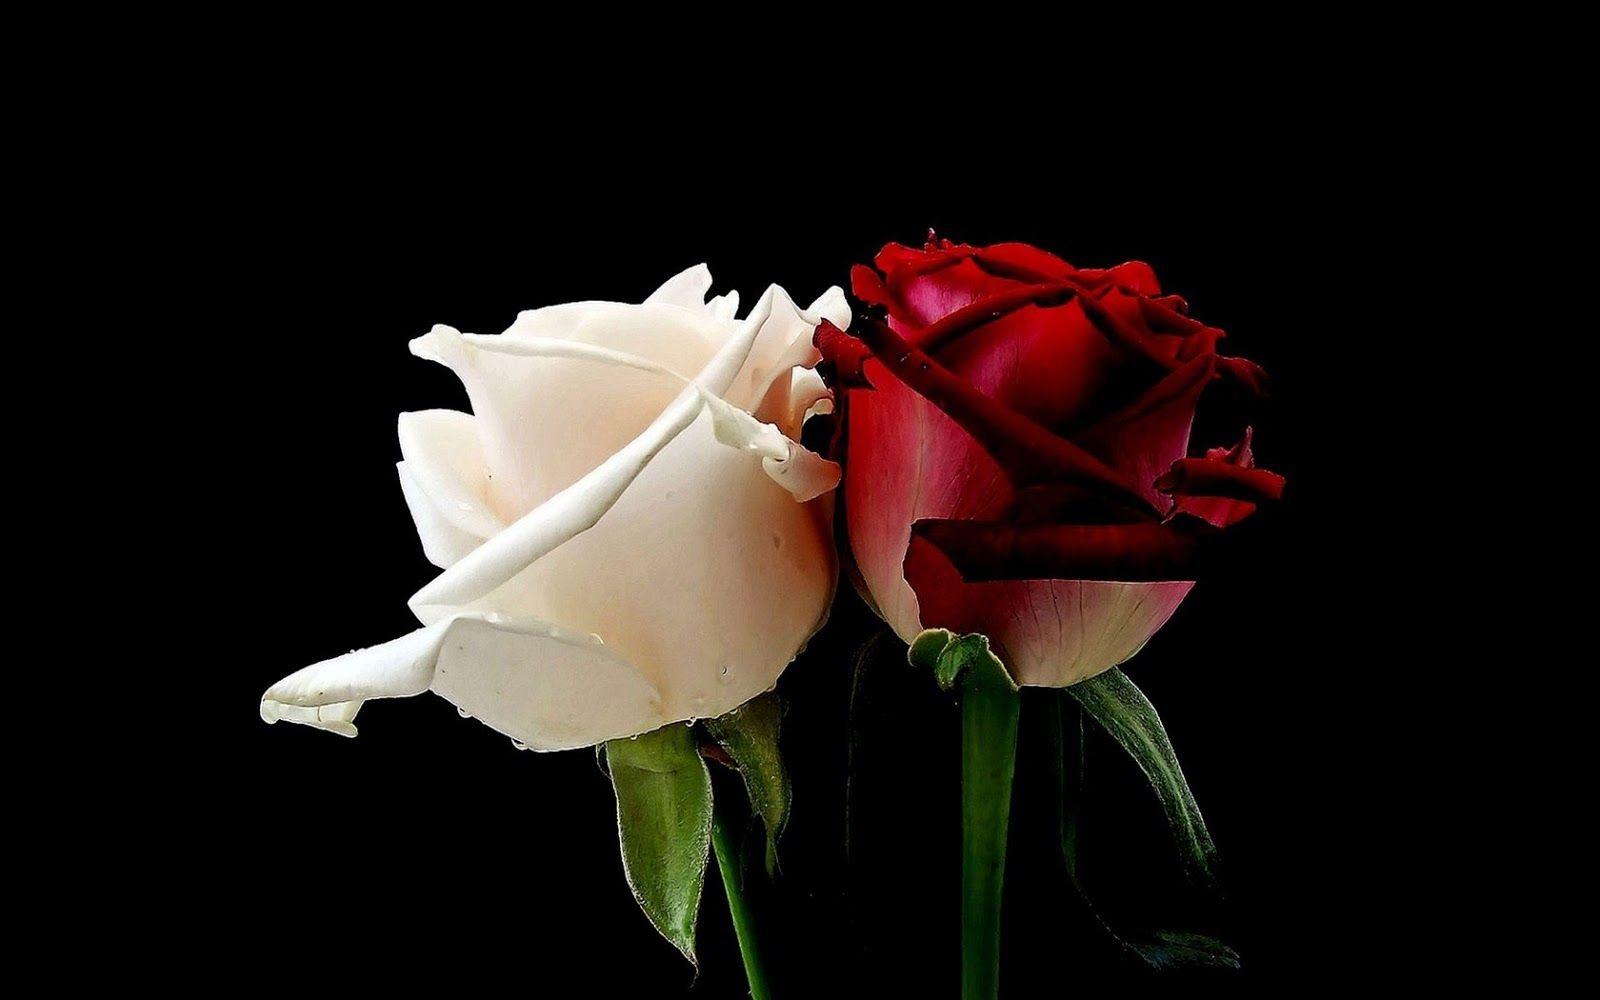 Black And Red Roses Wallpapers - Wallpaper Cave